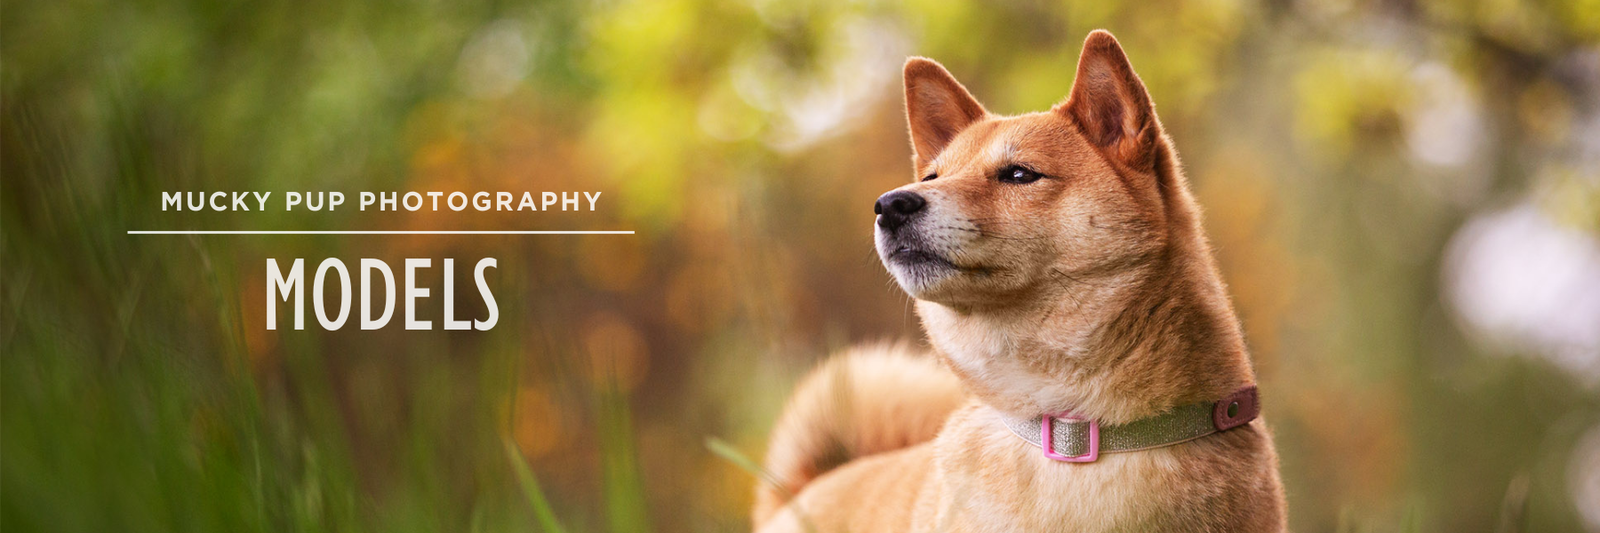 shiba inu in long grass looking off to the side